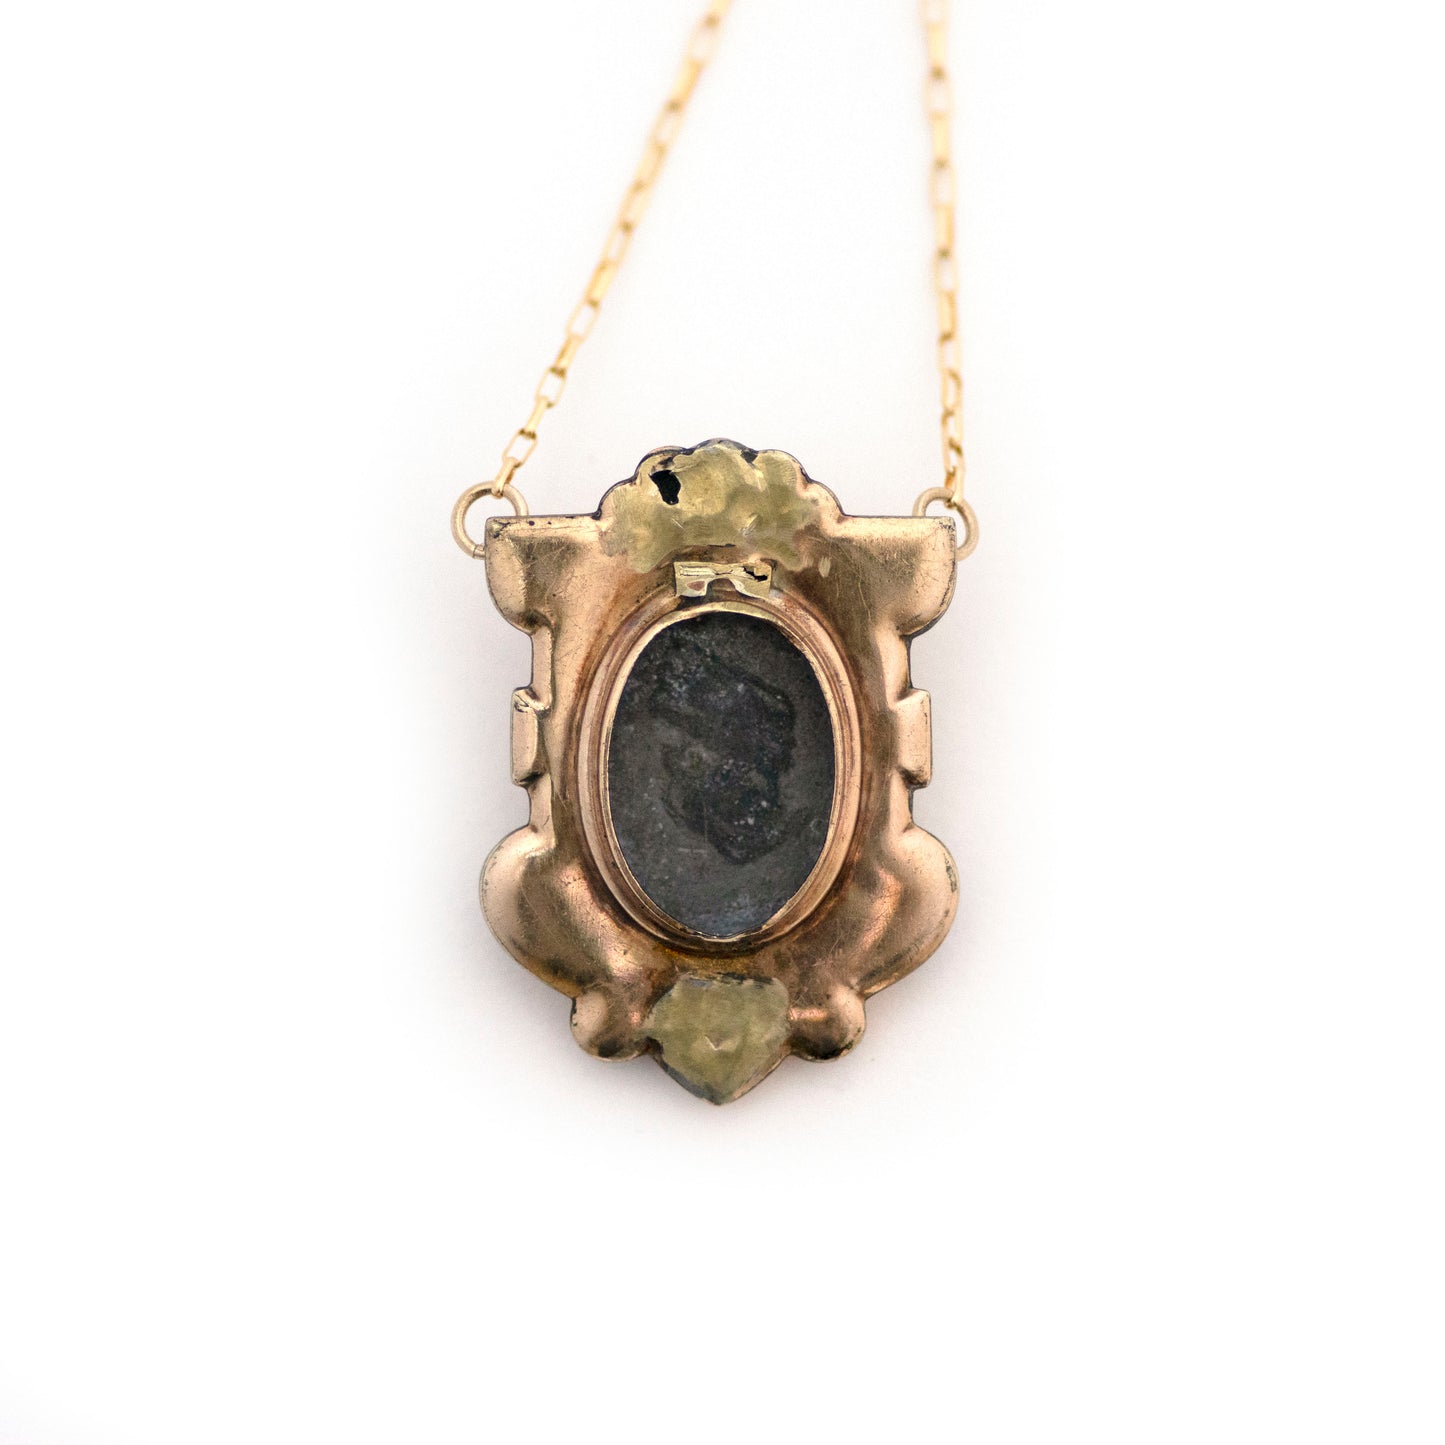 The back of Antique Victorian Blue Paste Shield Necklace shows a hidden locket on the back where the glass cover is missing.